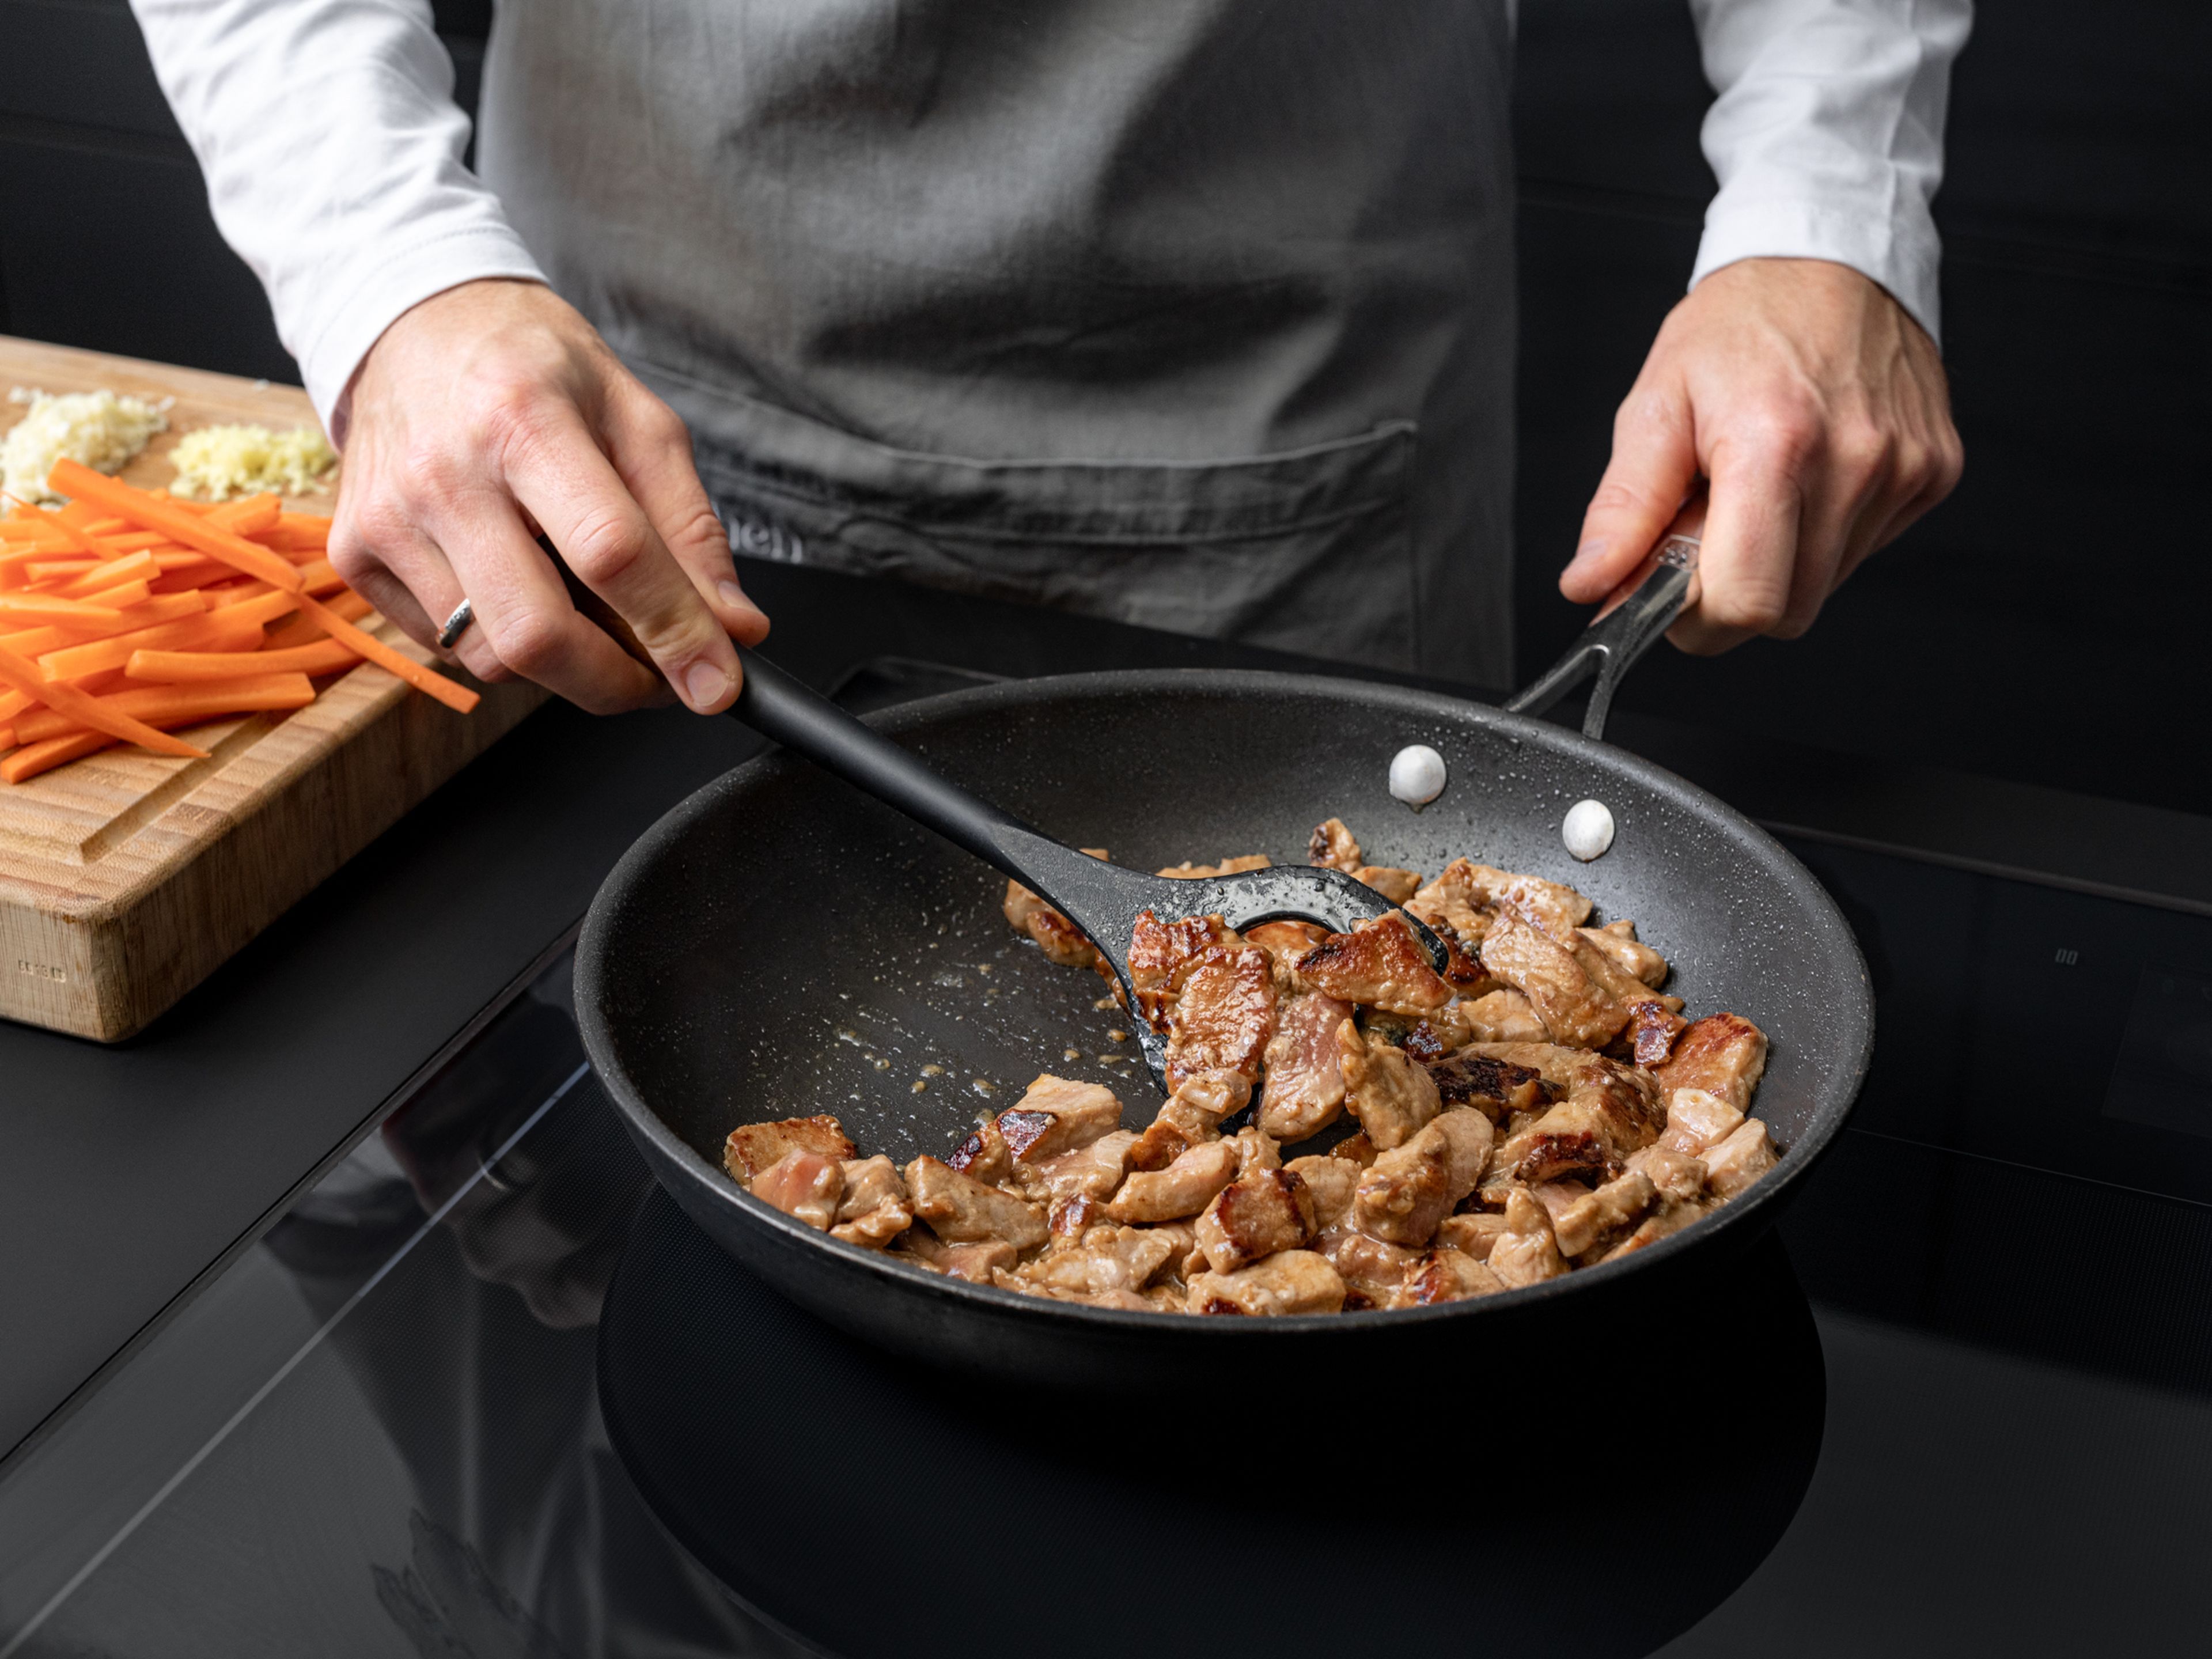 Heat vegetable oil in a non-stick frying pan over medium high heat. When oil is hot, add pork strips, and quickly stir fry to sear the meat. Leave some space in between the pork pieces to prevent sticking, if needed, fry them in two batches. When the pork is almost cooked through, remove from the pan and set aside.